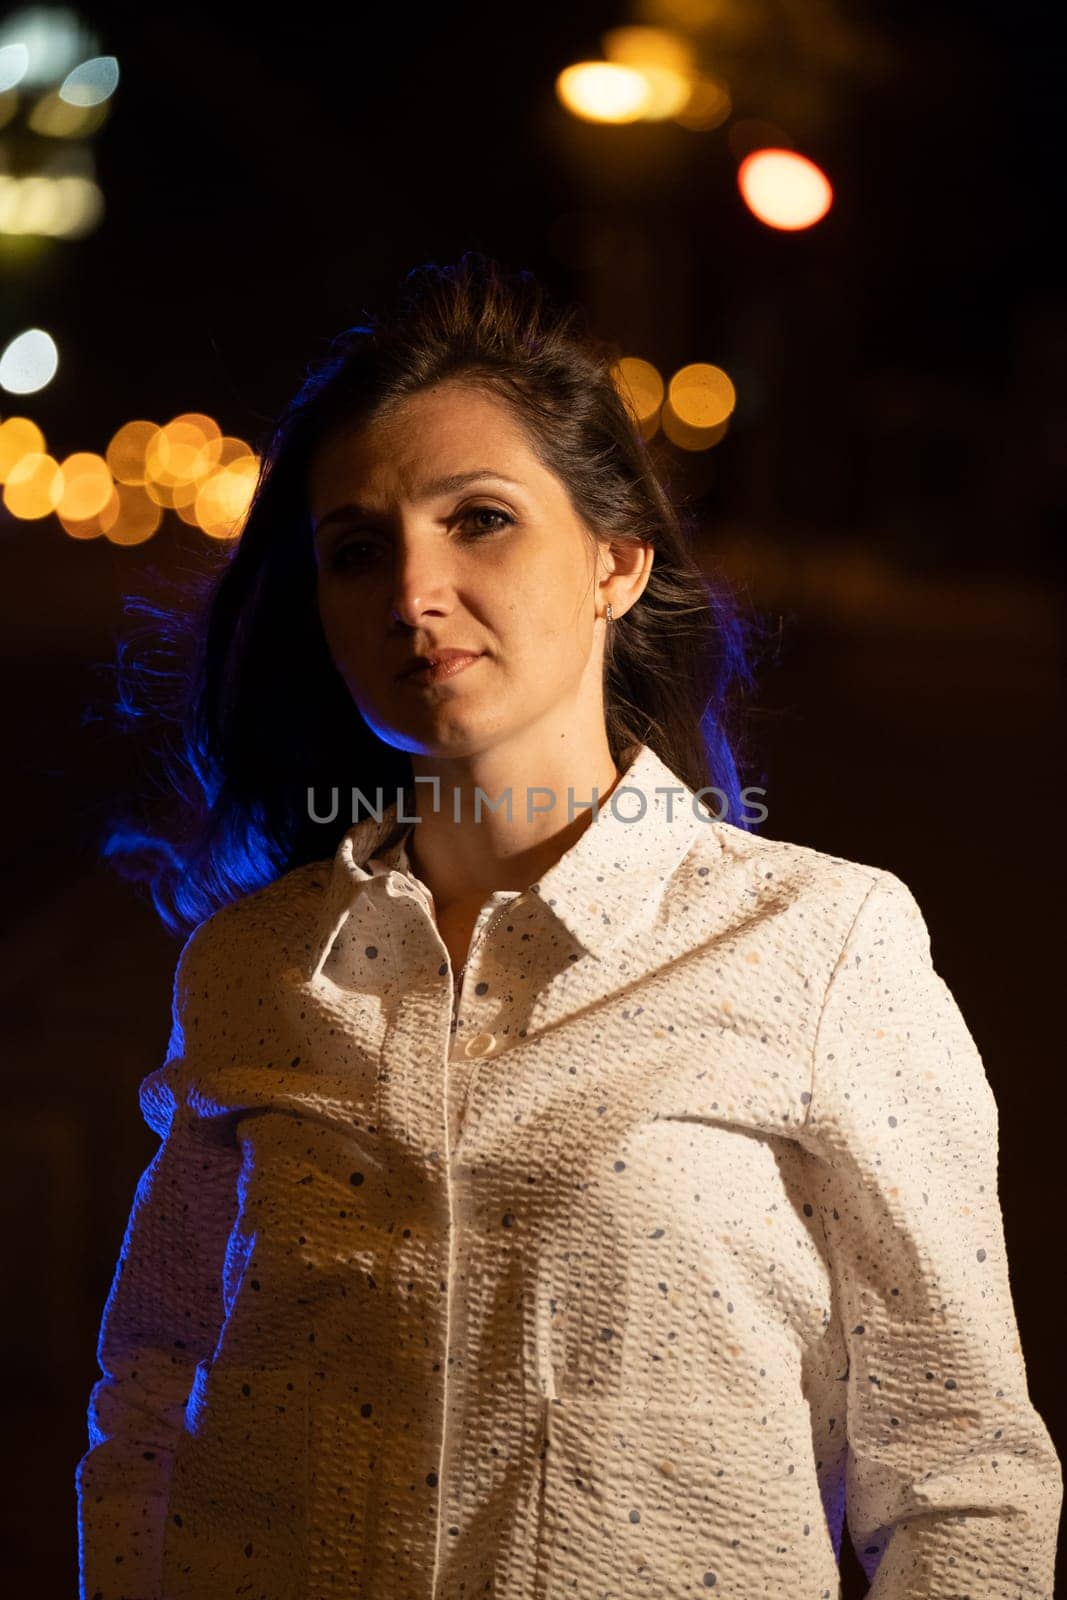 gorgeous brunette girl portrait in night city lights. Vogue fashion style by igor010